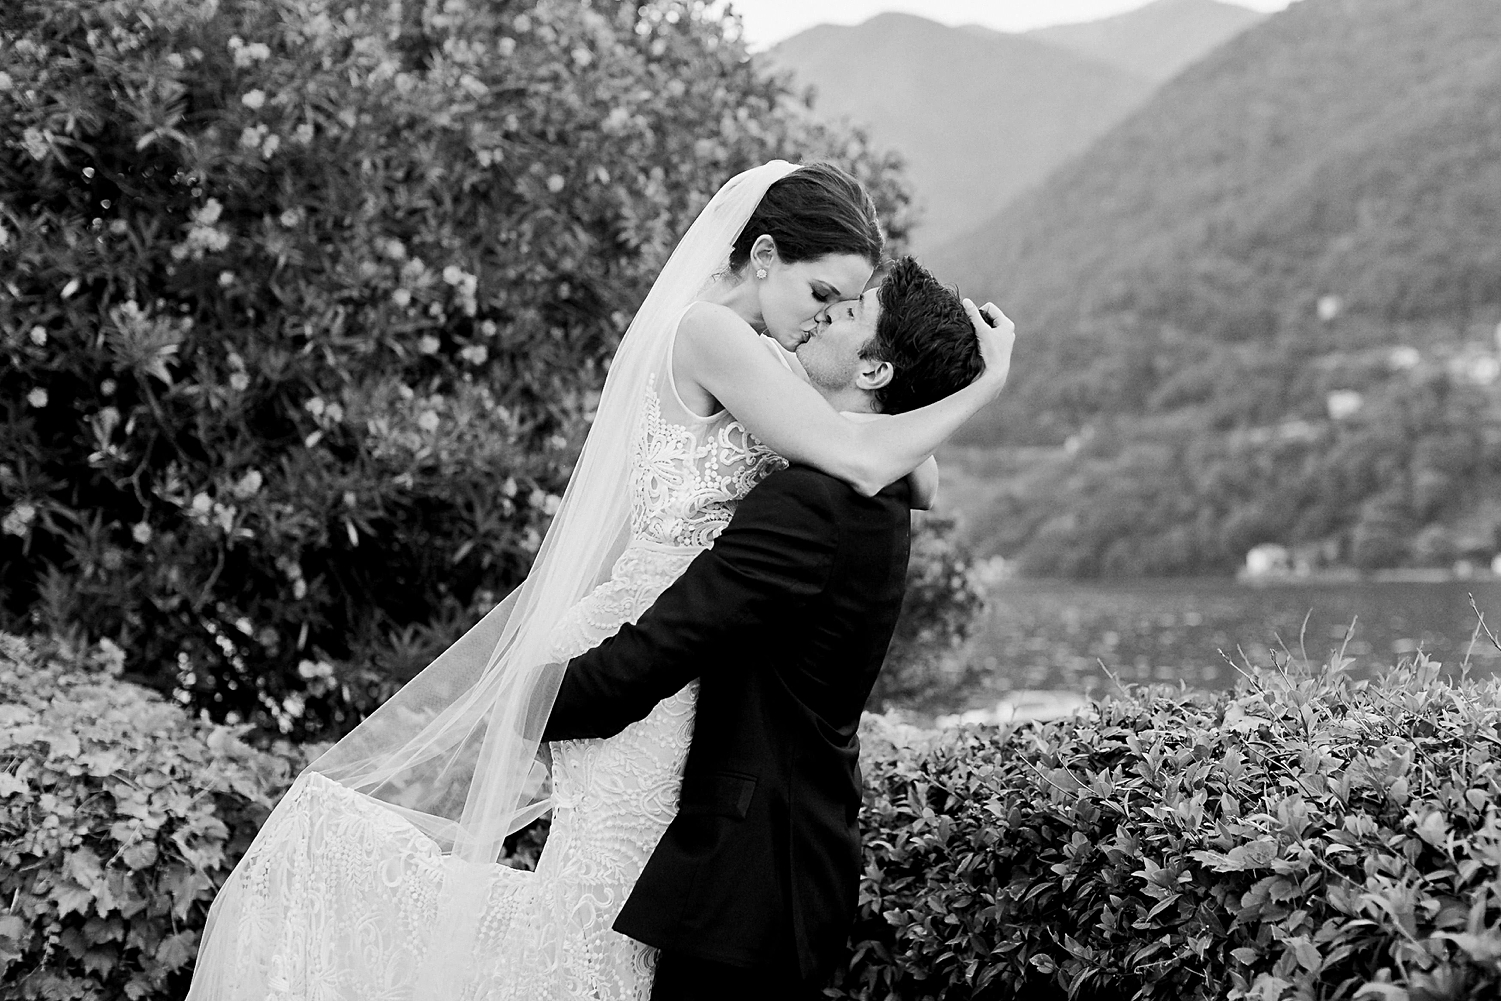 Bride kissing groom in front of mountains Italy planning elopement wedding destination black and white